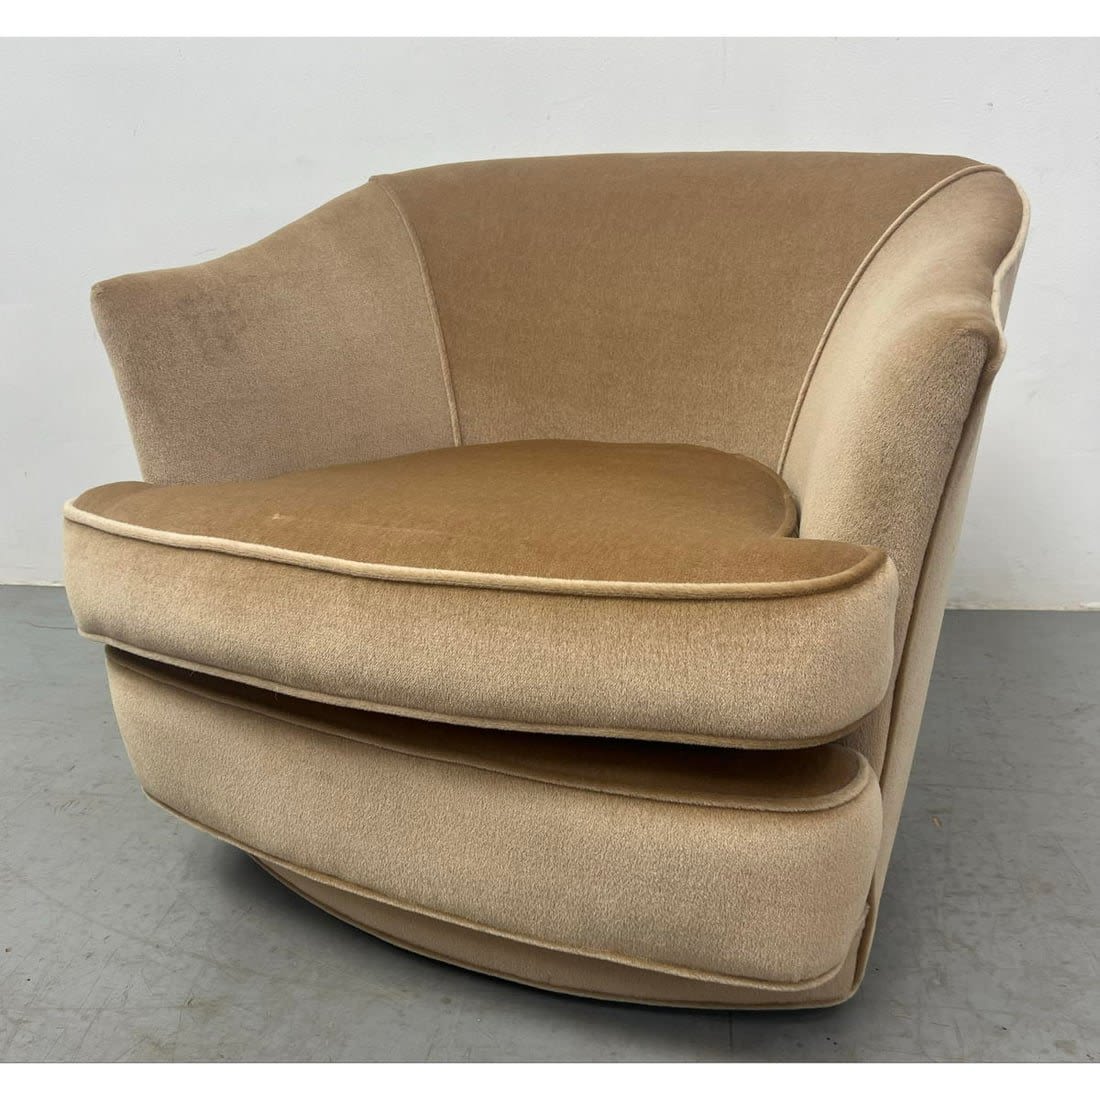 Swivel Upholstered Lounge Chair.